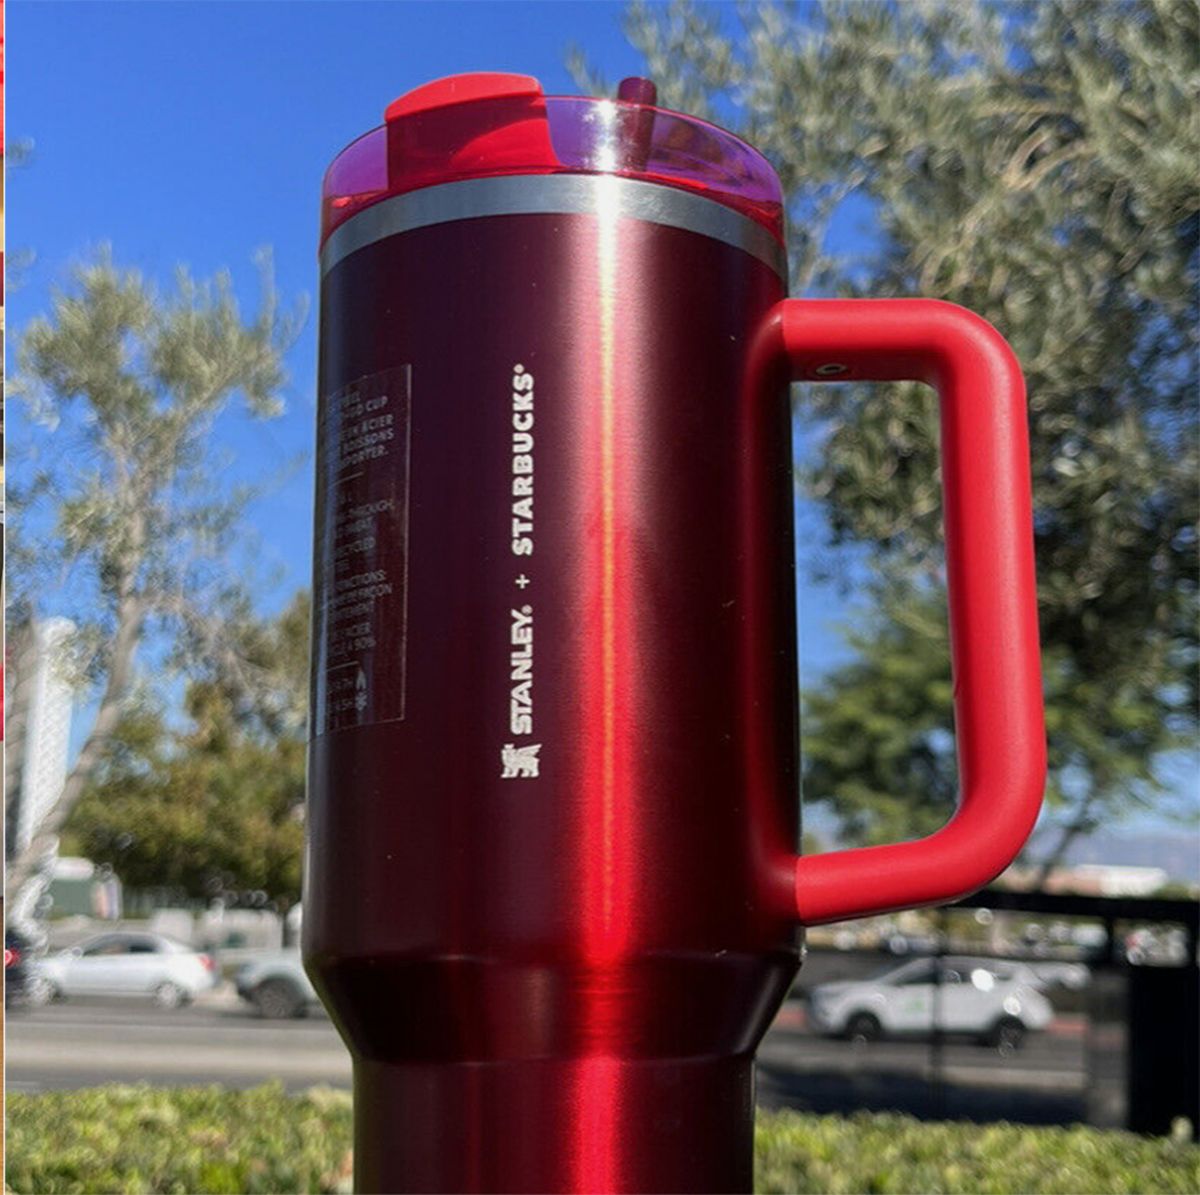 Starbucks' Stanley Cup at Target: New Photos and Restock Details